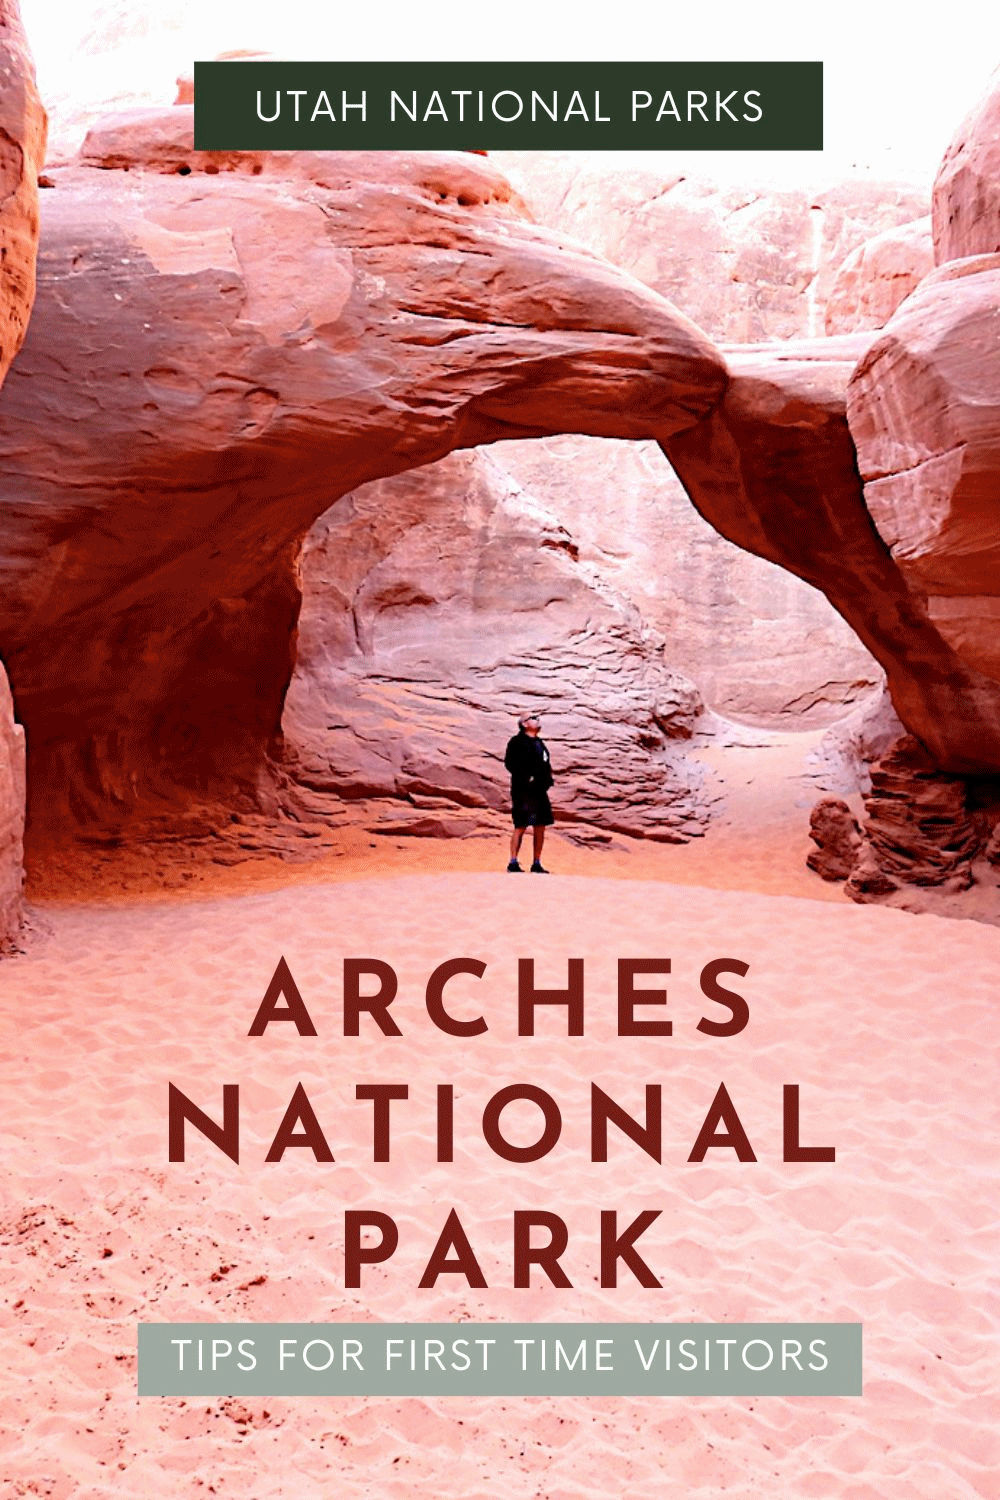 Arches National Park - tips for first-time visitors